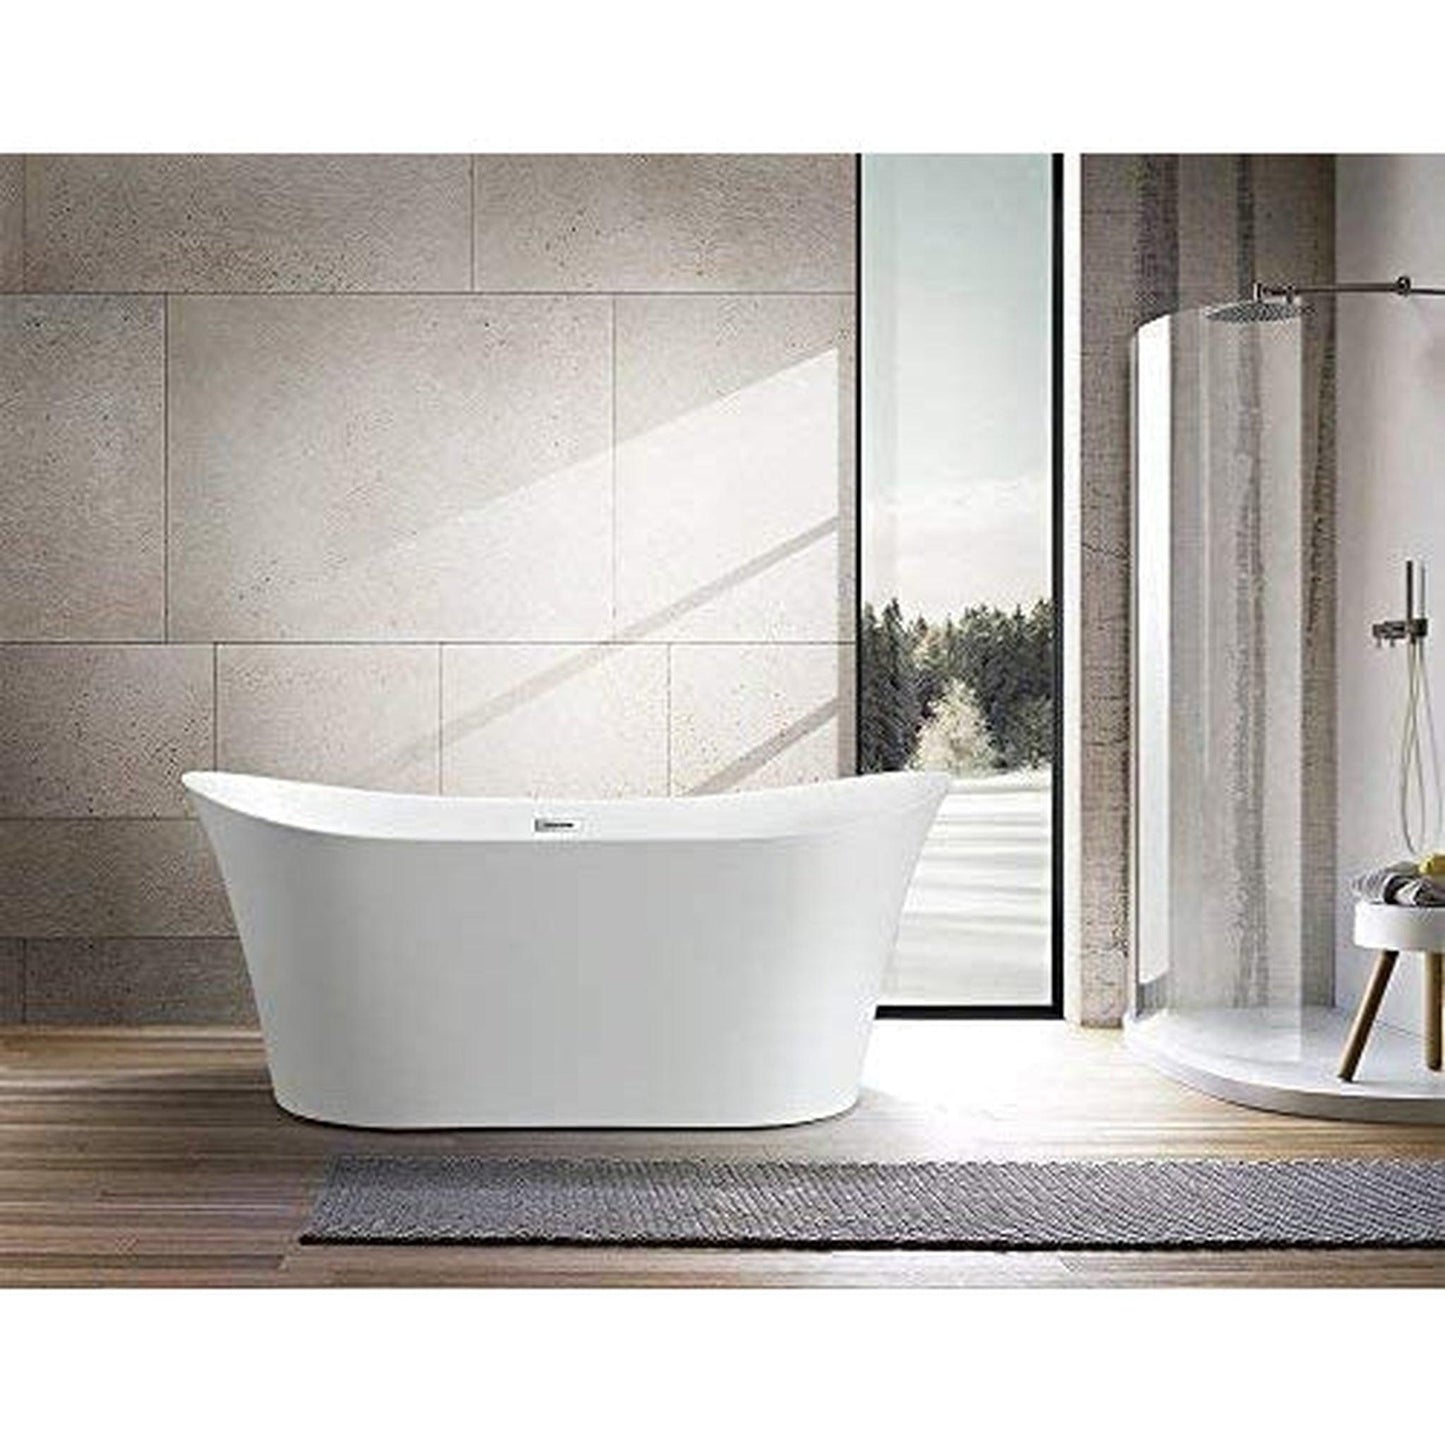 Vanity Art VA6805 67" W x 29" H White Acrylic Modern Freestanding Bathtub With Polished Chrome Pop-up Drain, Slotted Overflow and Flexible Drain Hose